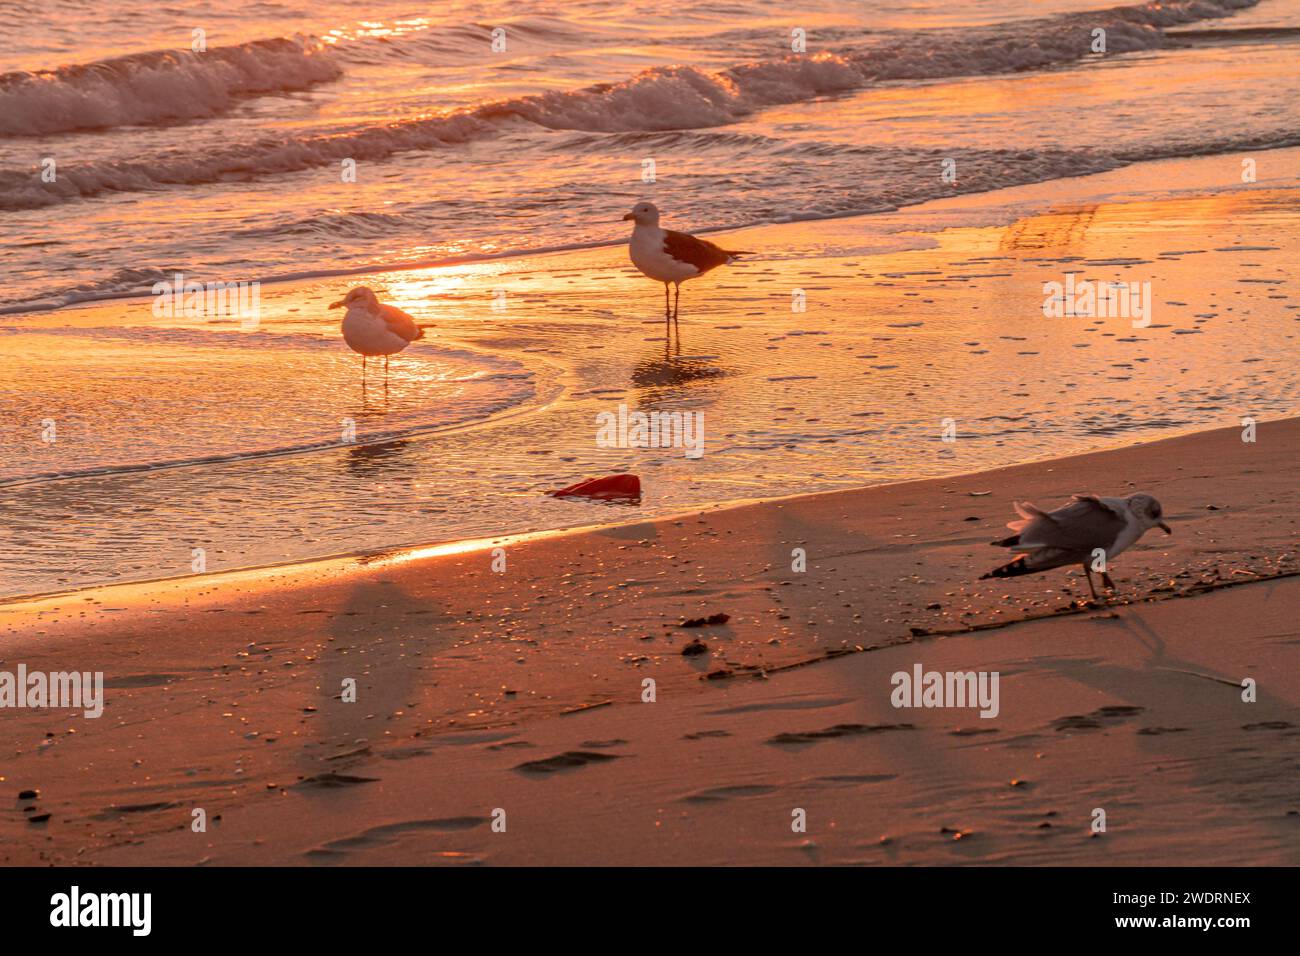 Seagulls wading in the surf at sunrise. Stock Photo